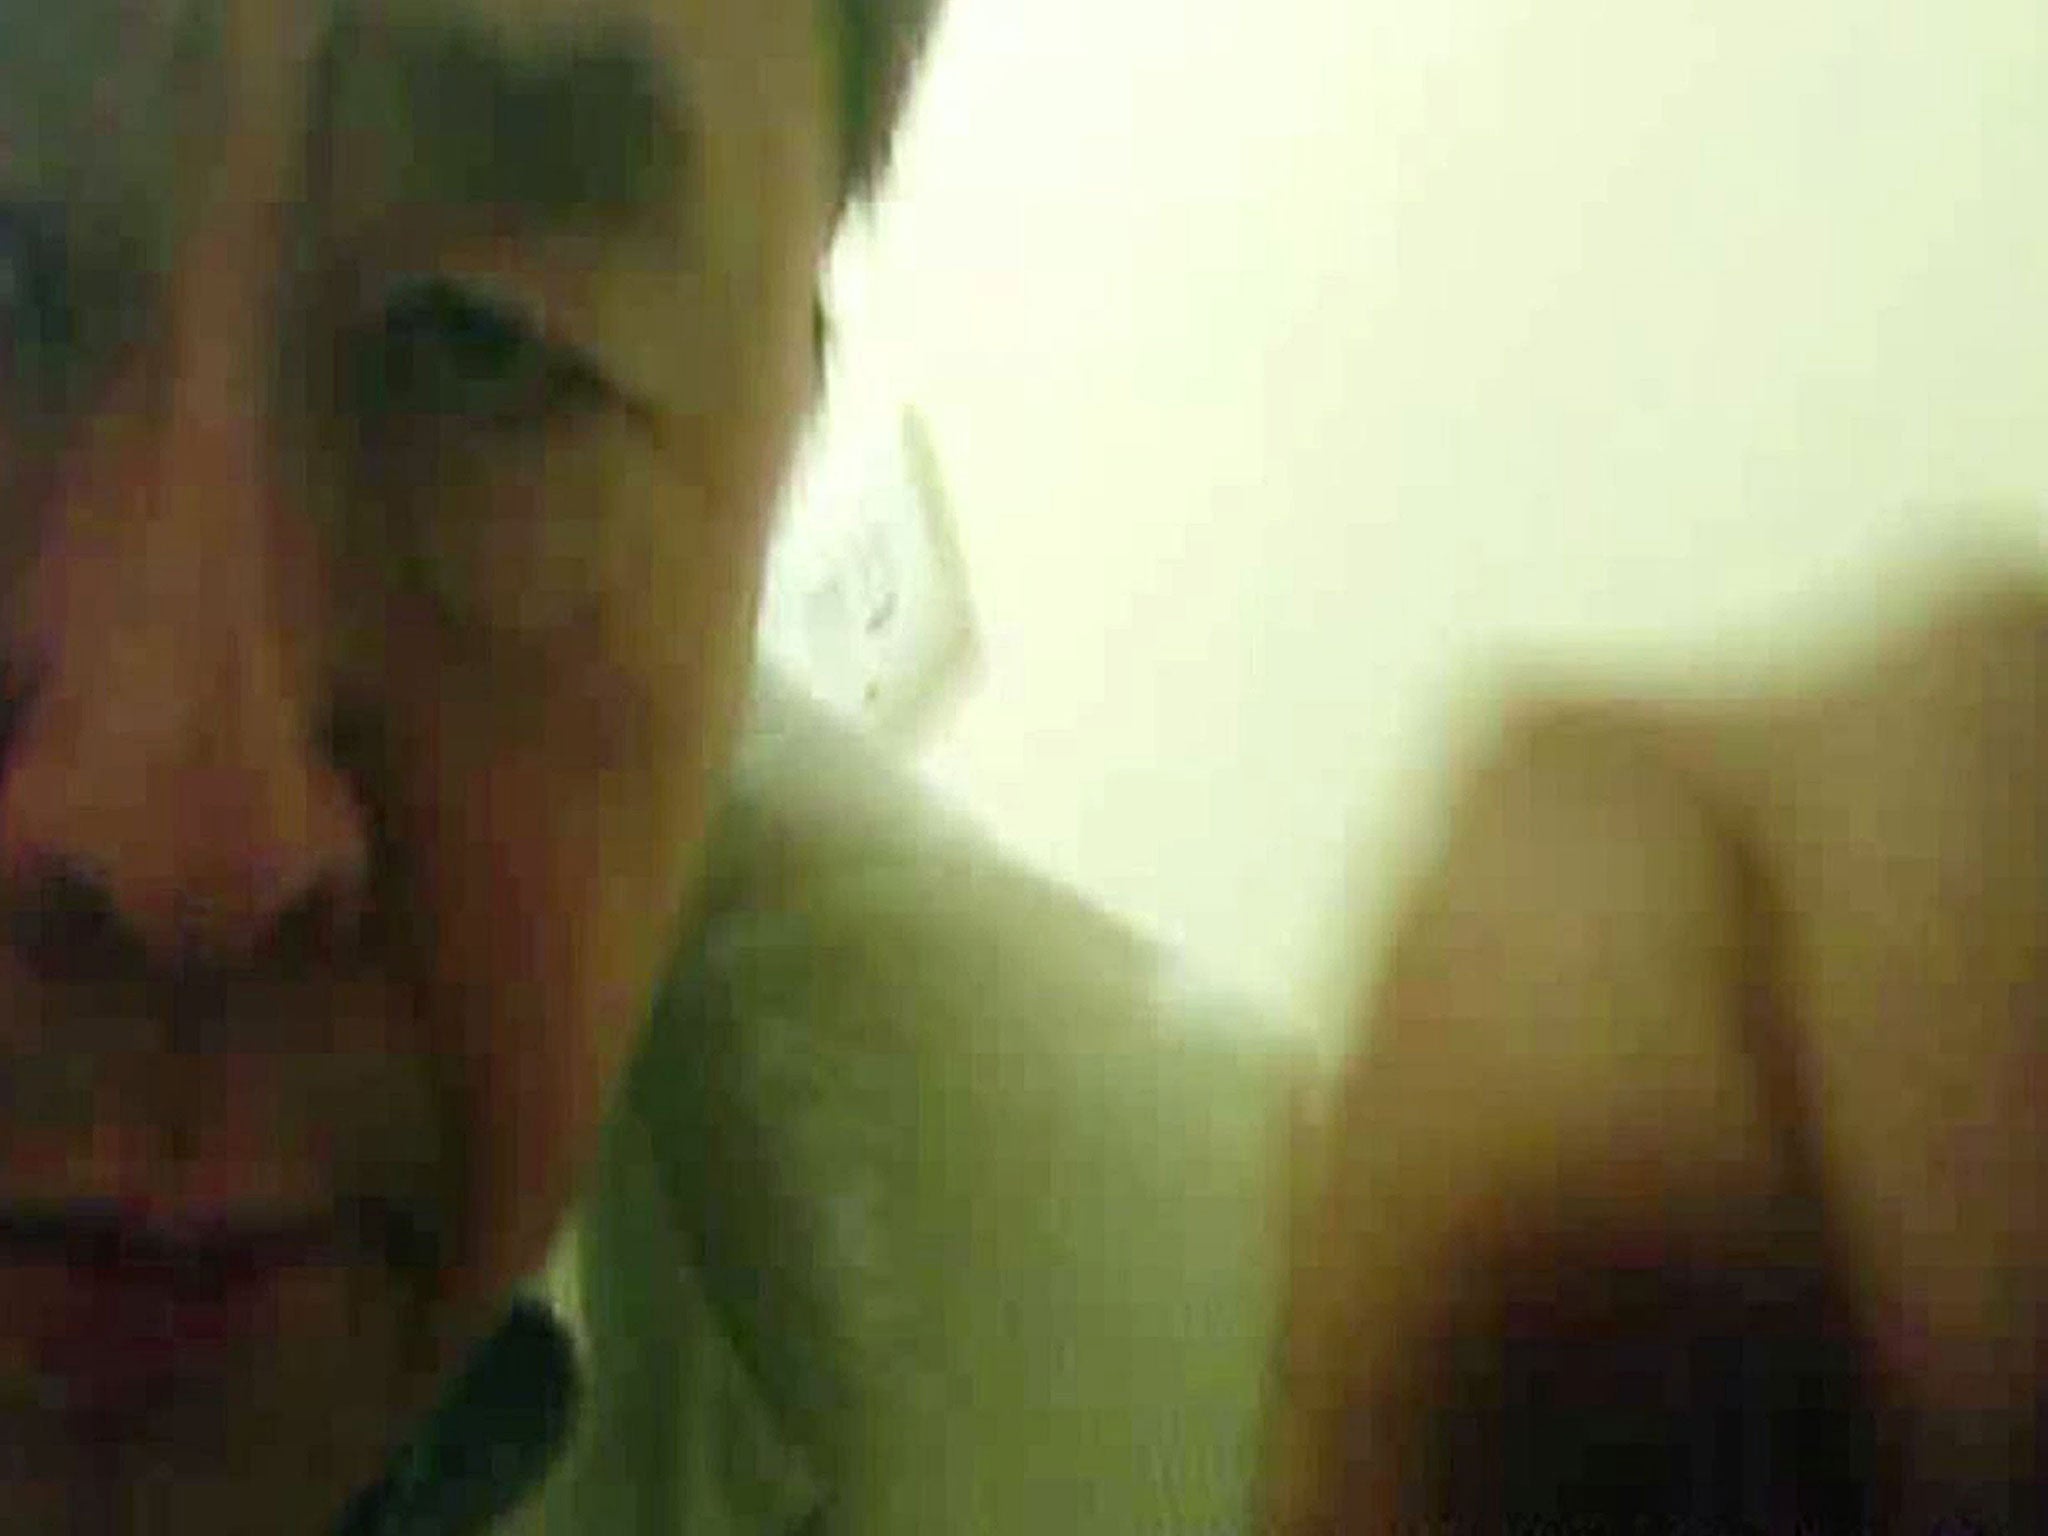 Dr Lam Hoe Yeoh Voyeur doctor jailed for eight years after using network of hidden cameras to film patients, colleagues and friends on the toilet The Independent The Independent